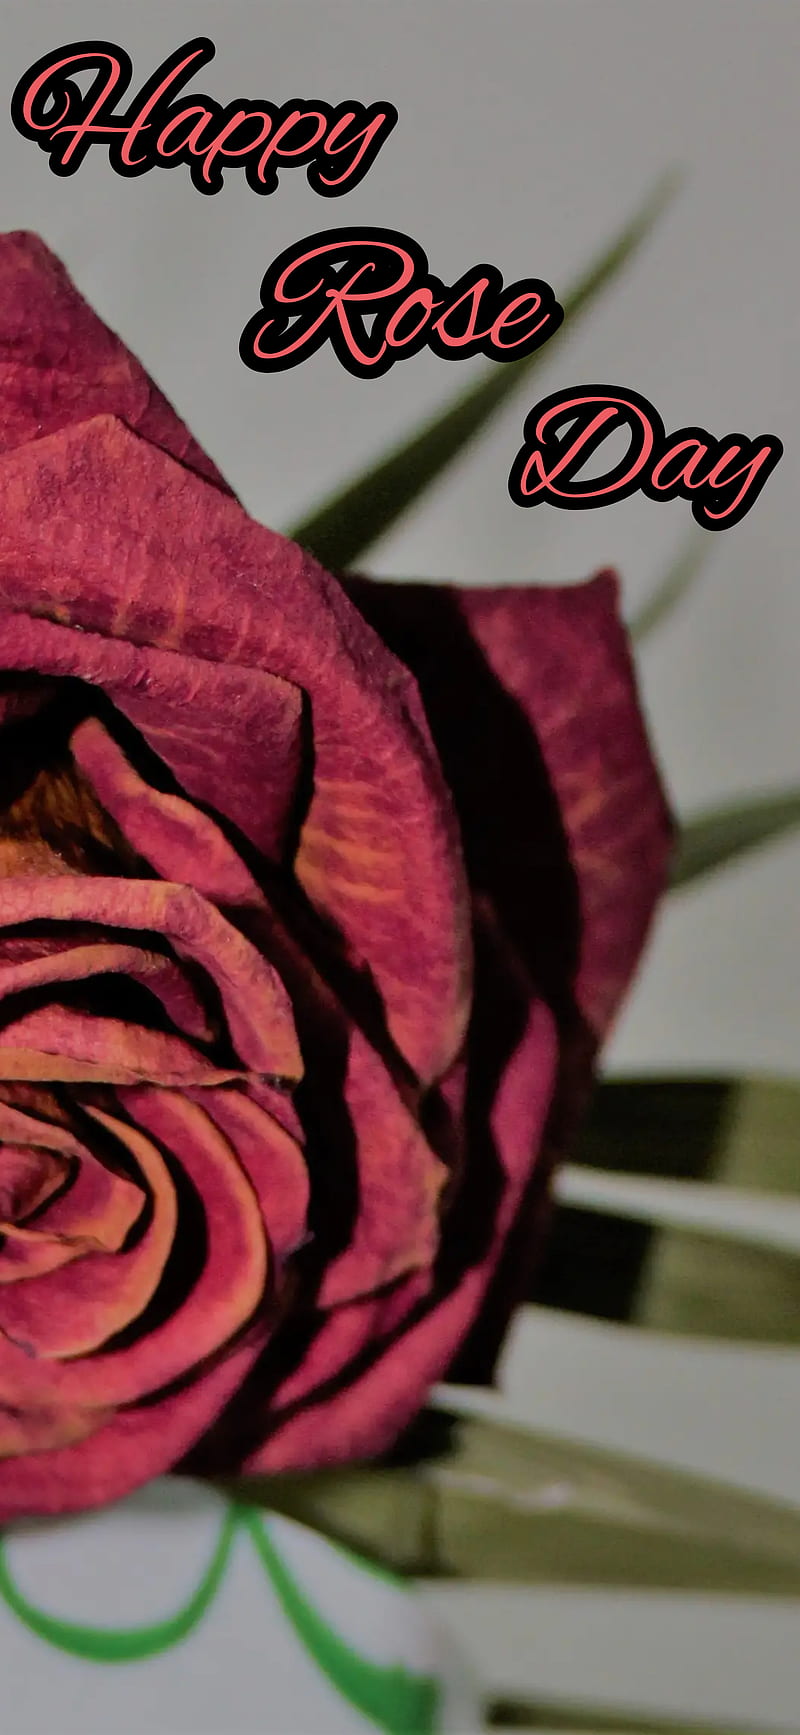 Happy Rose Day, first day, flowers, heart, love, rose day, roses, you, HD  phone wallpaper | Peakpx